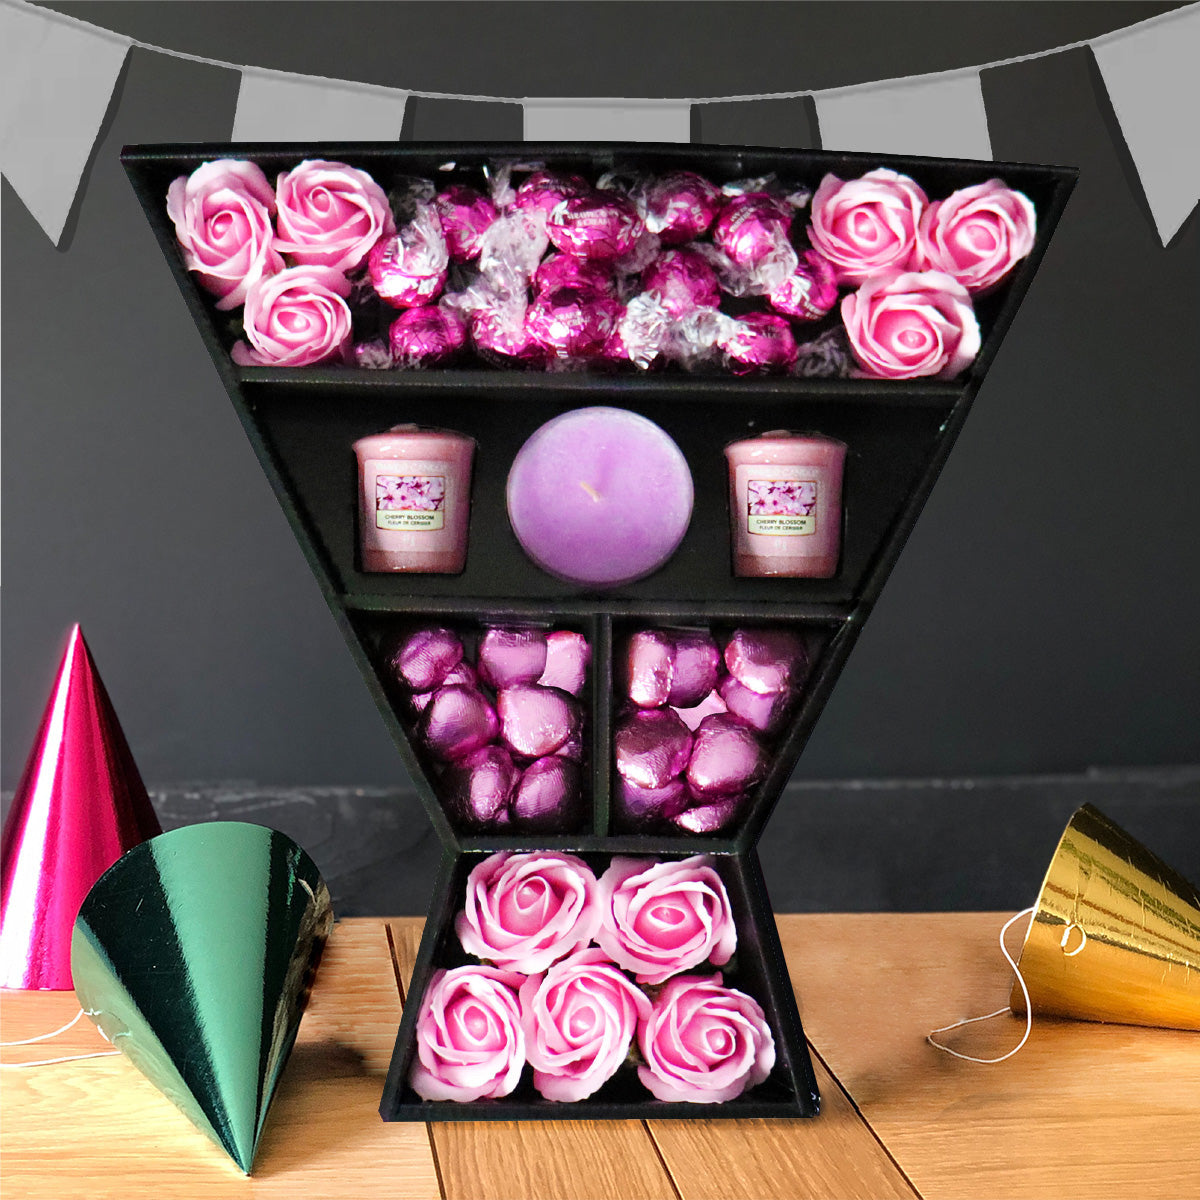 Lindt Lindor & Yankee Candle Happy Birthday Signature Chocolate Bouquet With Pink Roses - Perfect Birthday Gift